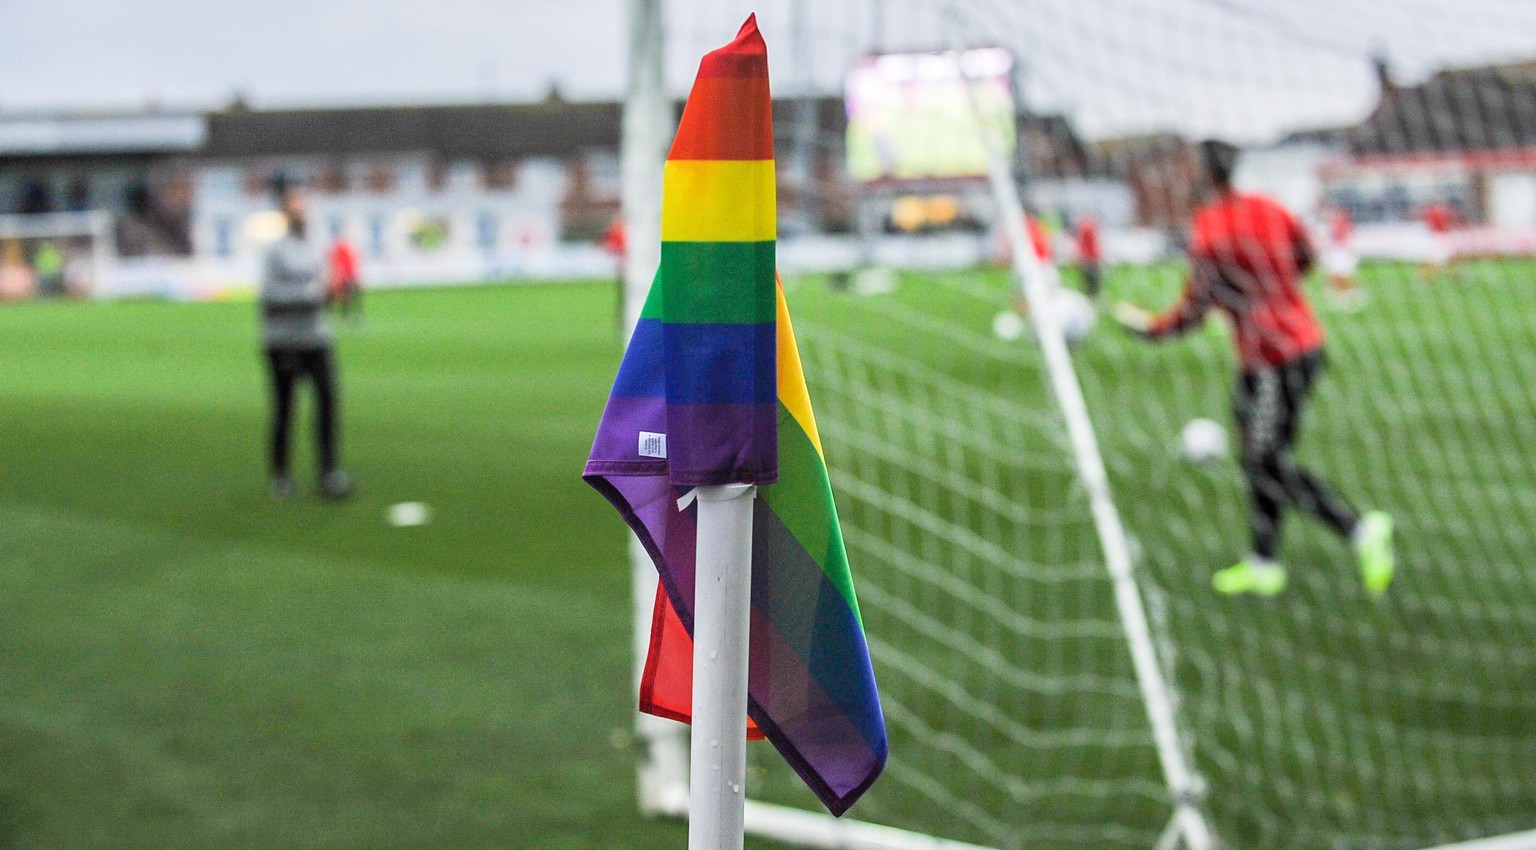 Fleetwood Town supporting rainbow laces during the Sky Bet League 1 match between Fleetwood Town and Tranmere Rovers at Highbury Stadium, Fleetwood, England on 23 November 2019. PUBLICATIONxNOTxINxUK  ...